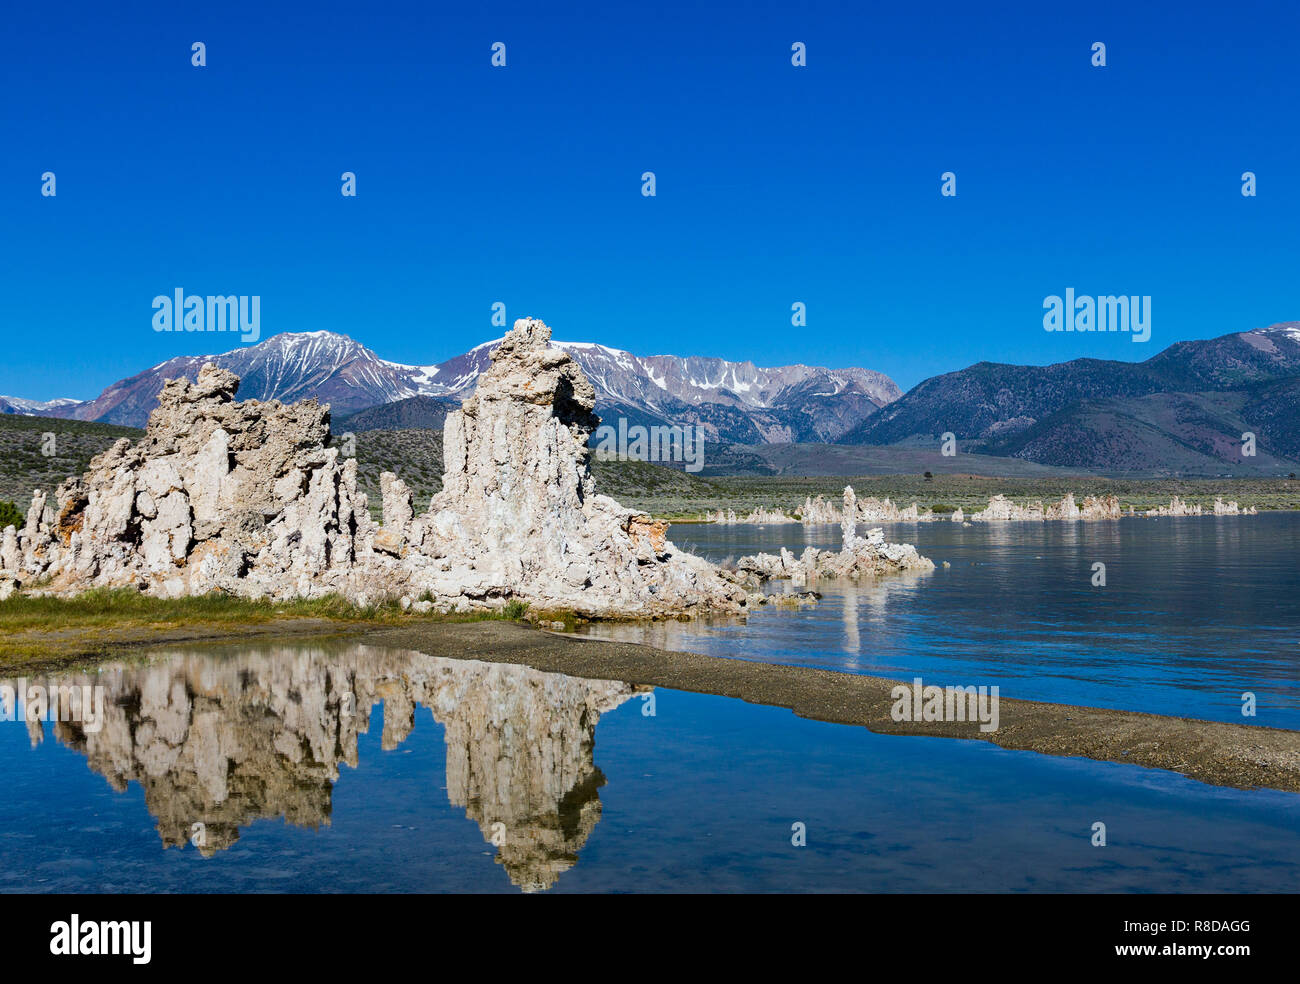 Subsurface waters enter the bottom of Mono Lake through small springs.  It took many decades to form the well-recognized tufa towers. When lake levels Stock Photo